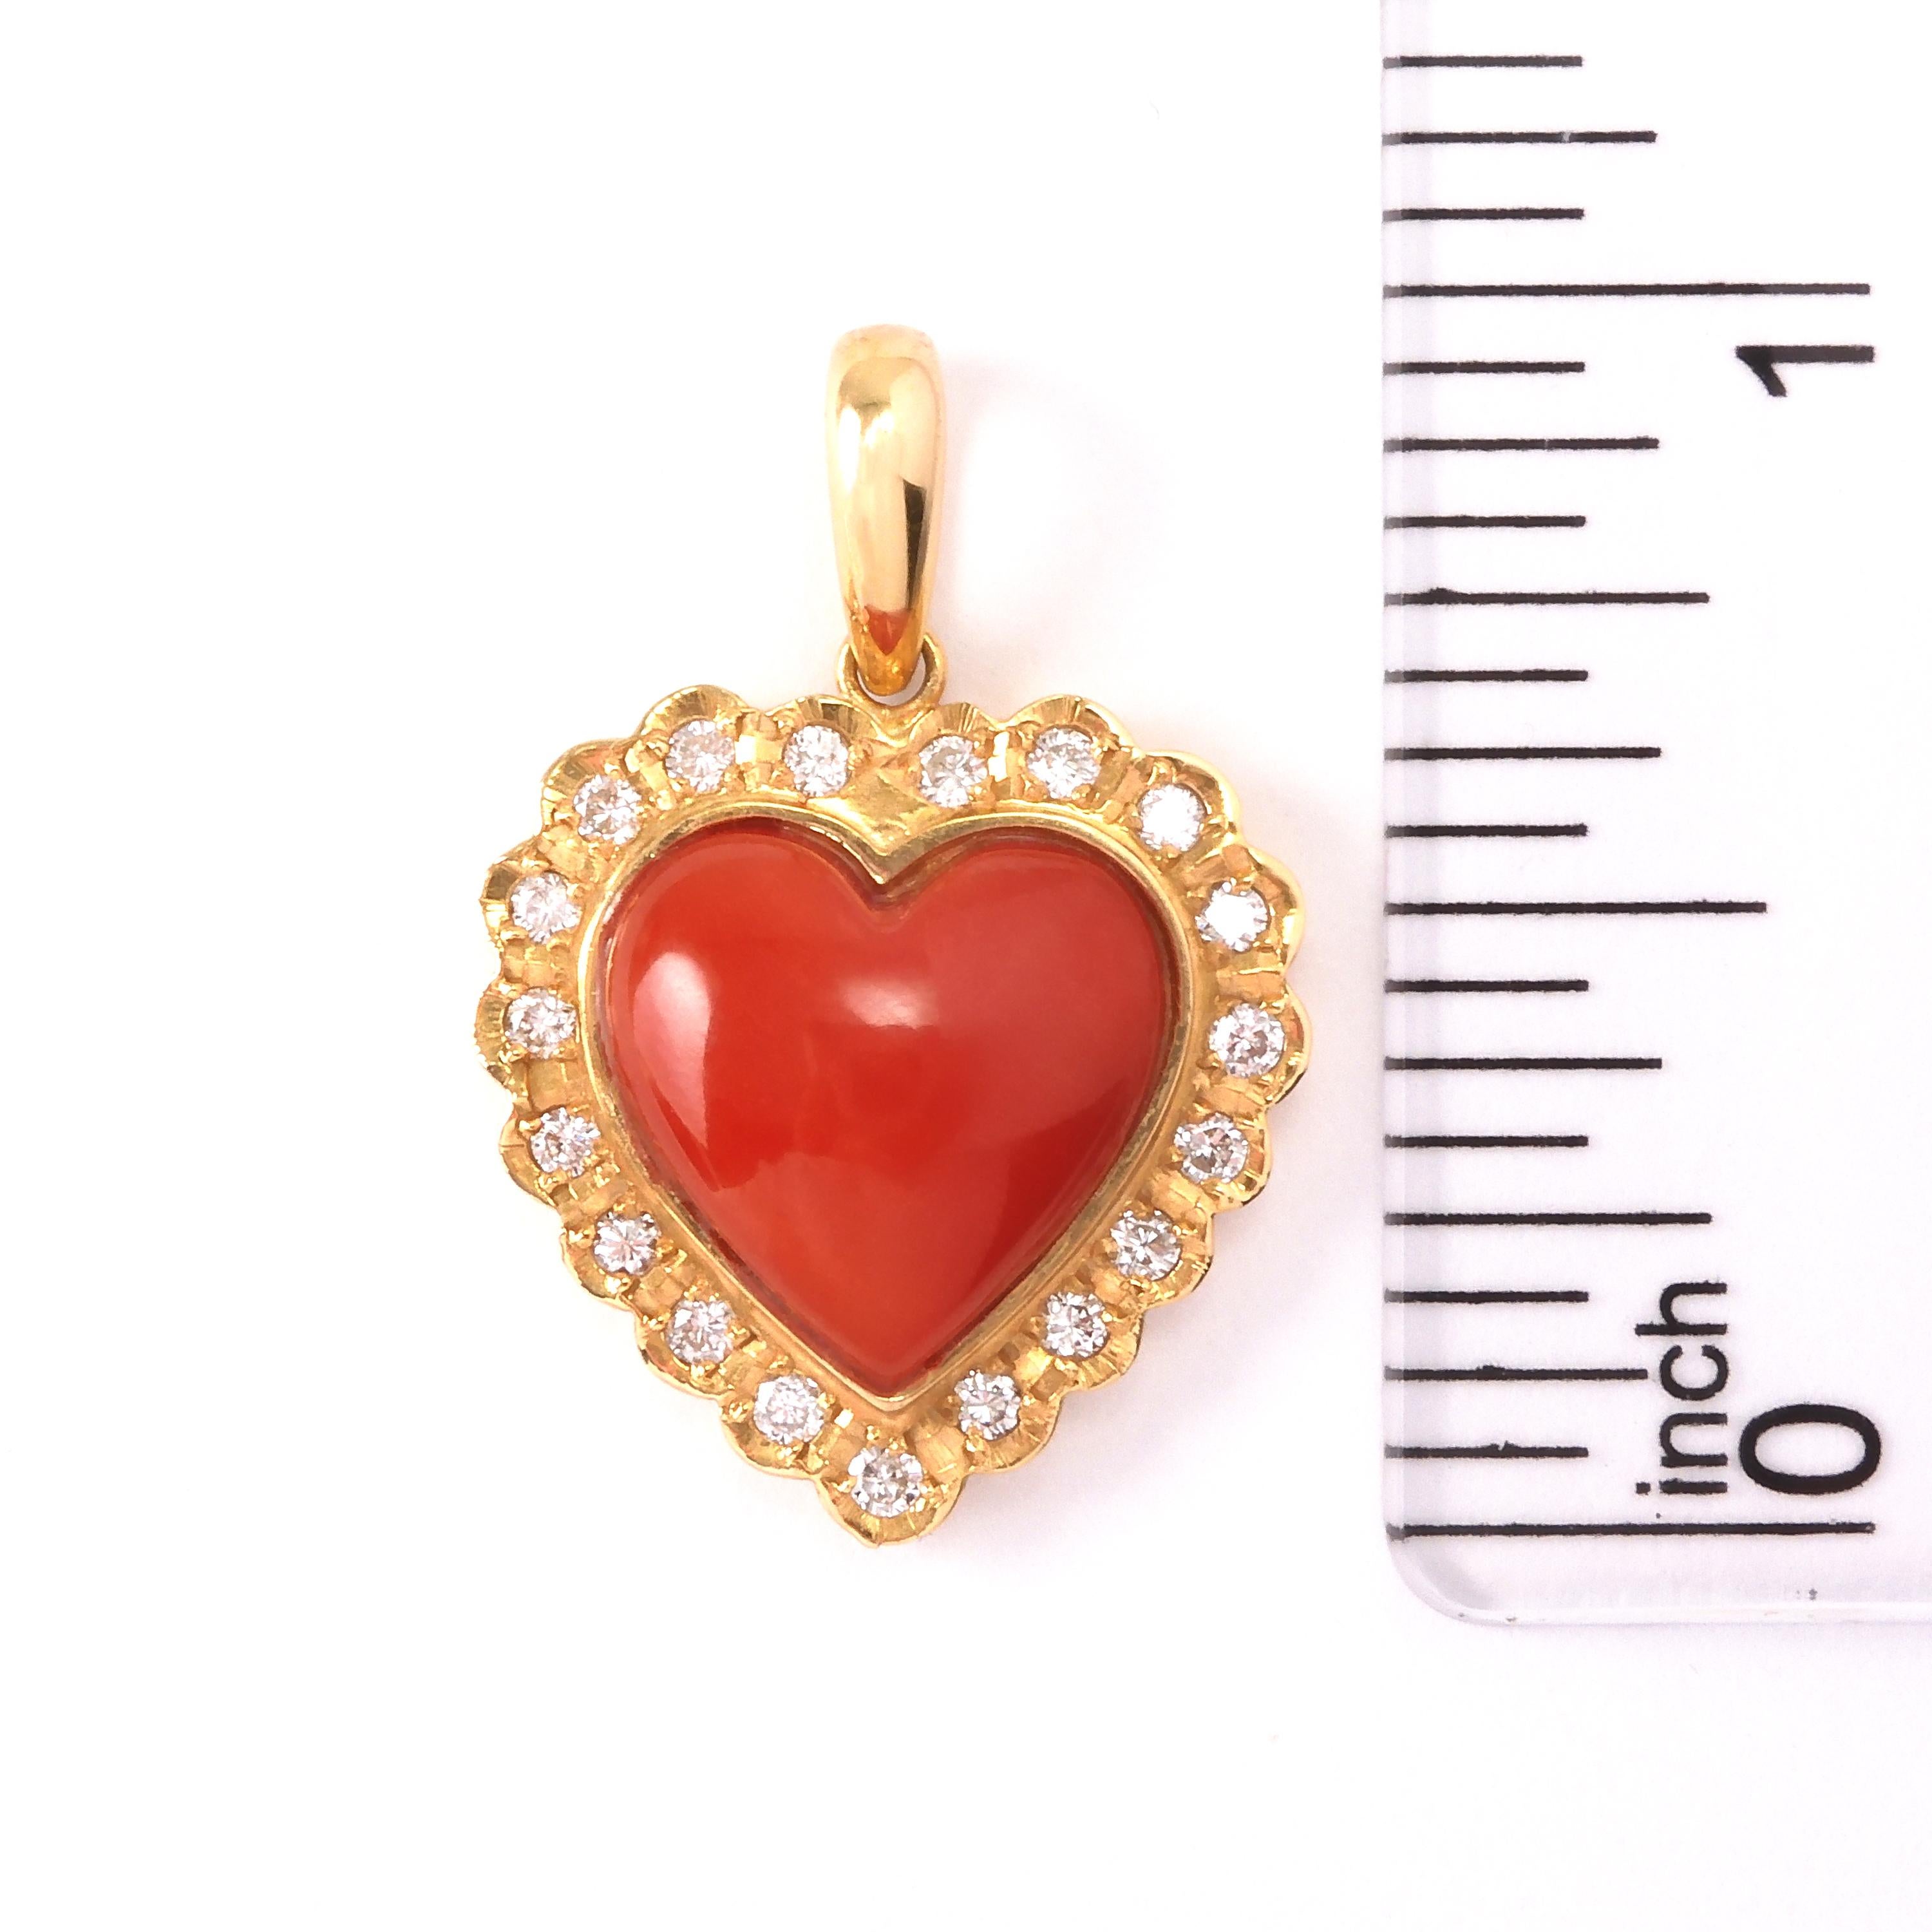 Women's 18 Karat Yellow Gold Japanese Red Coral Heart Shape Pendant Top with Diamonds For Sale